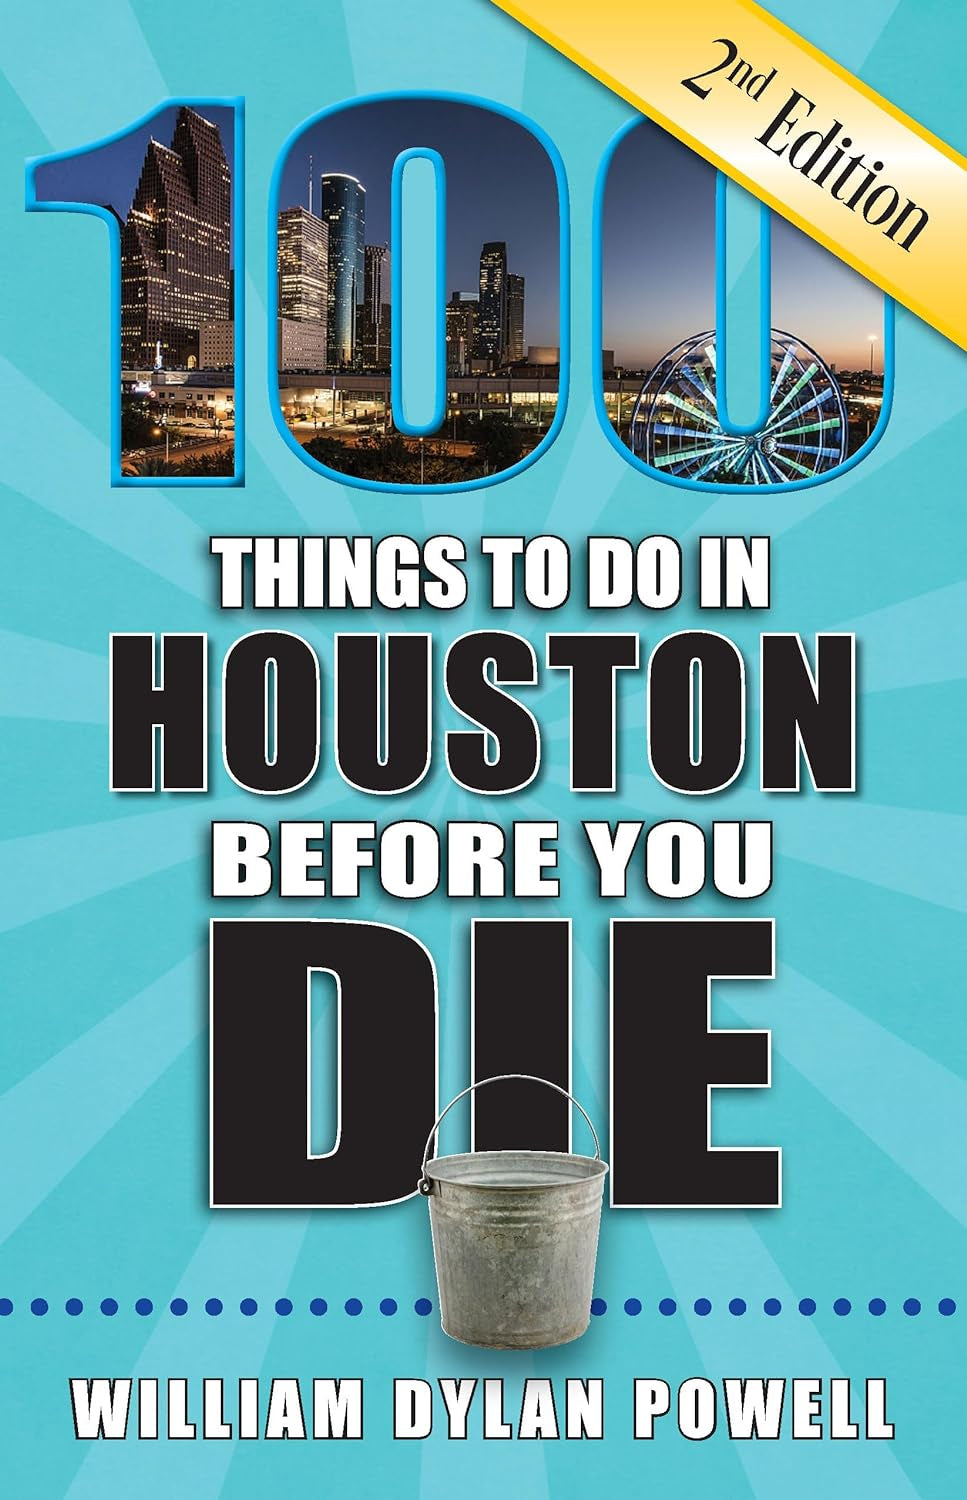 100 Things to Do in Houston before You Die, 2Nd Edition (100 Things to Do before You Die)